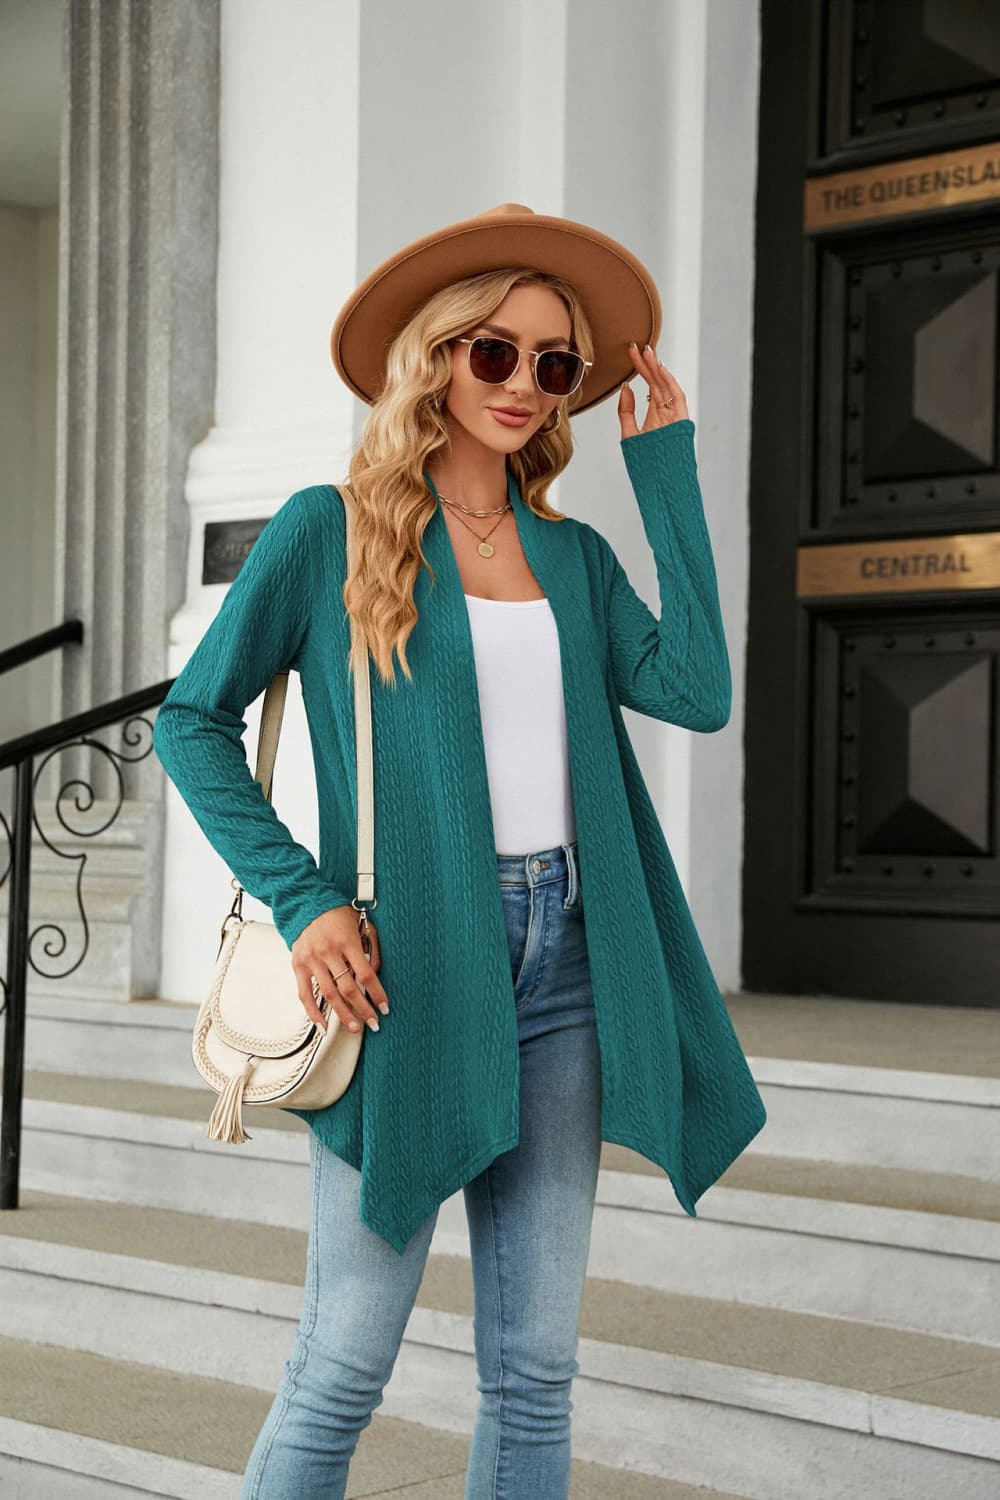 Long Sleeve Cardigan - Women’s Clothing & Accessories - Shirts & Tops - 14 - 2024